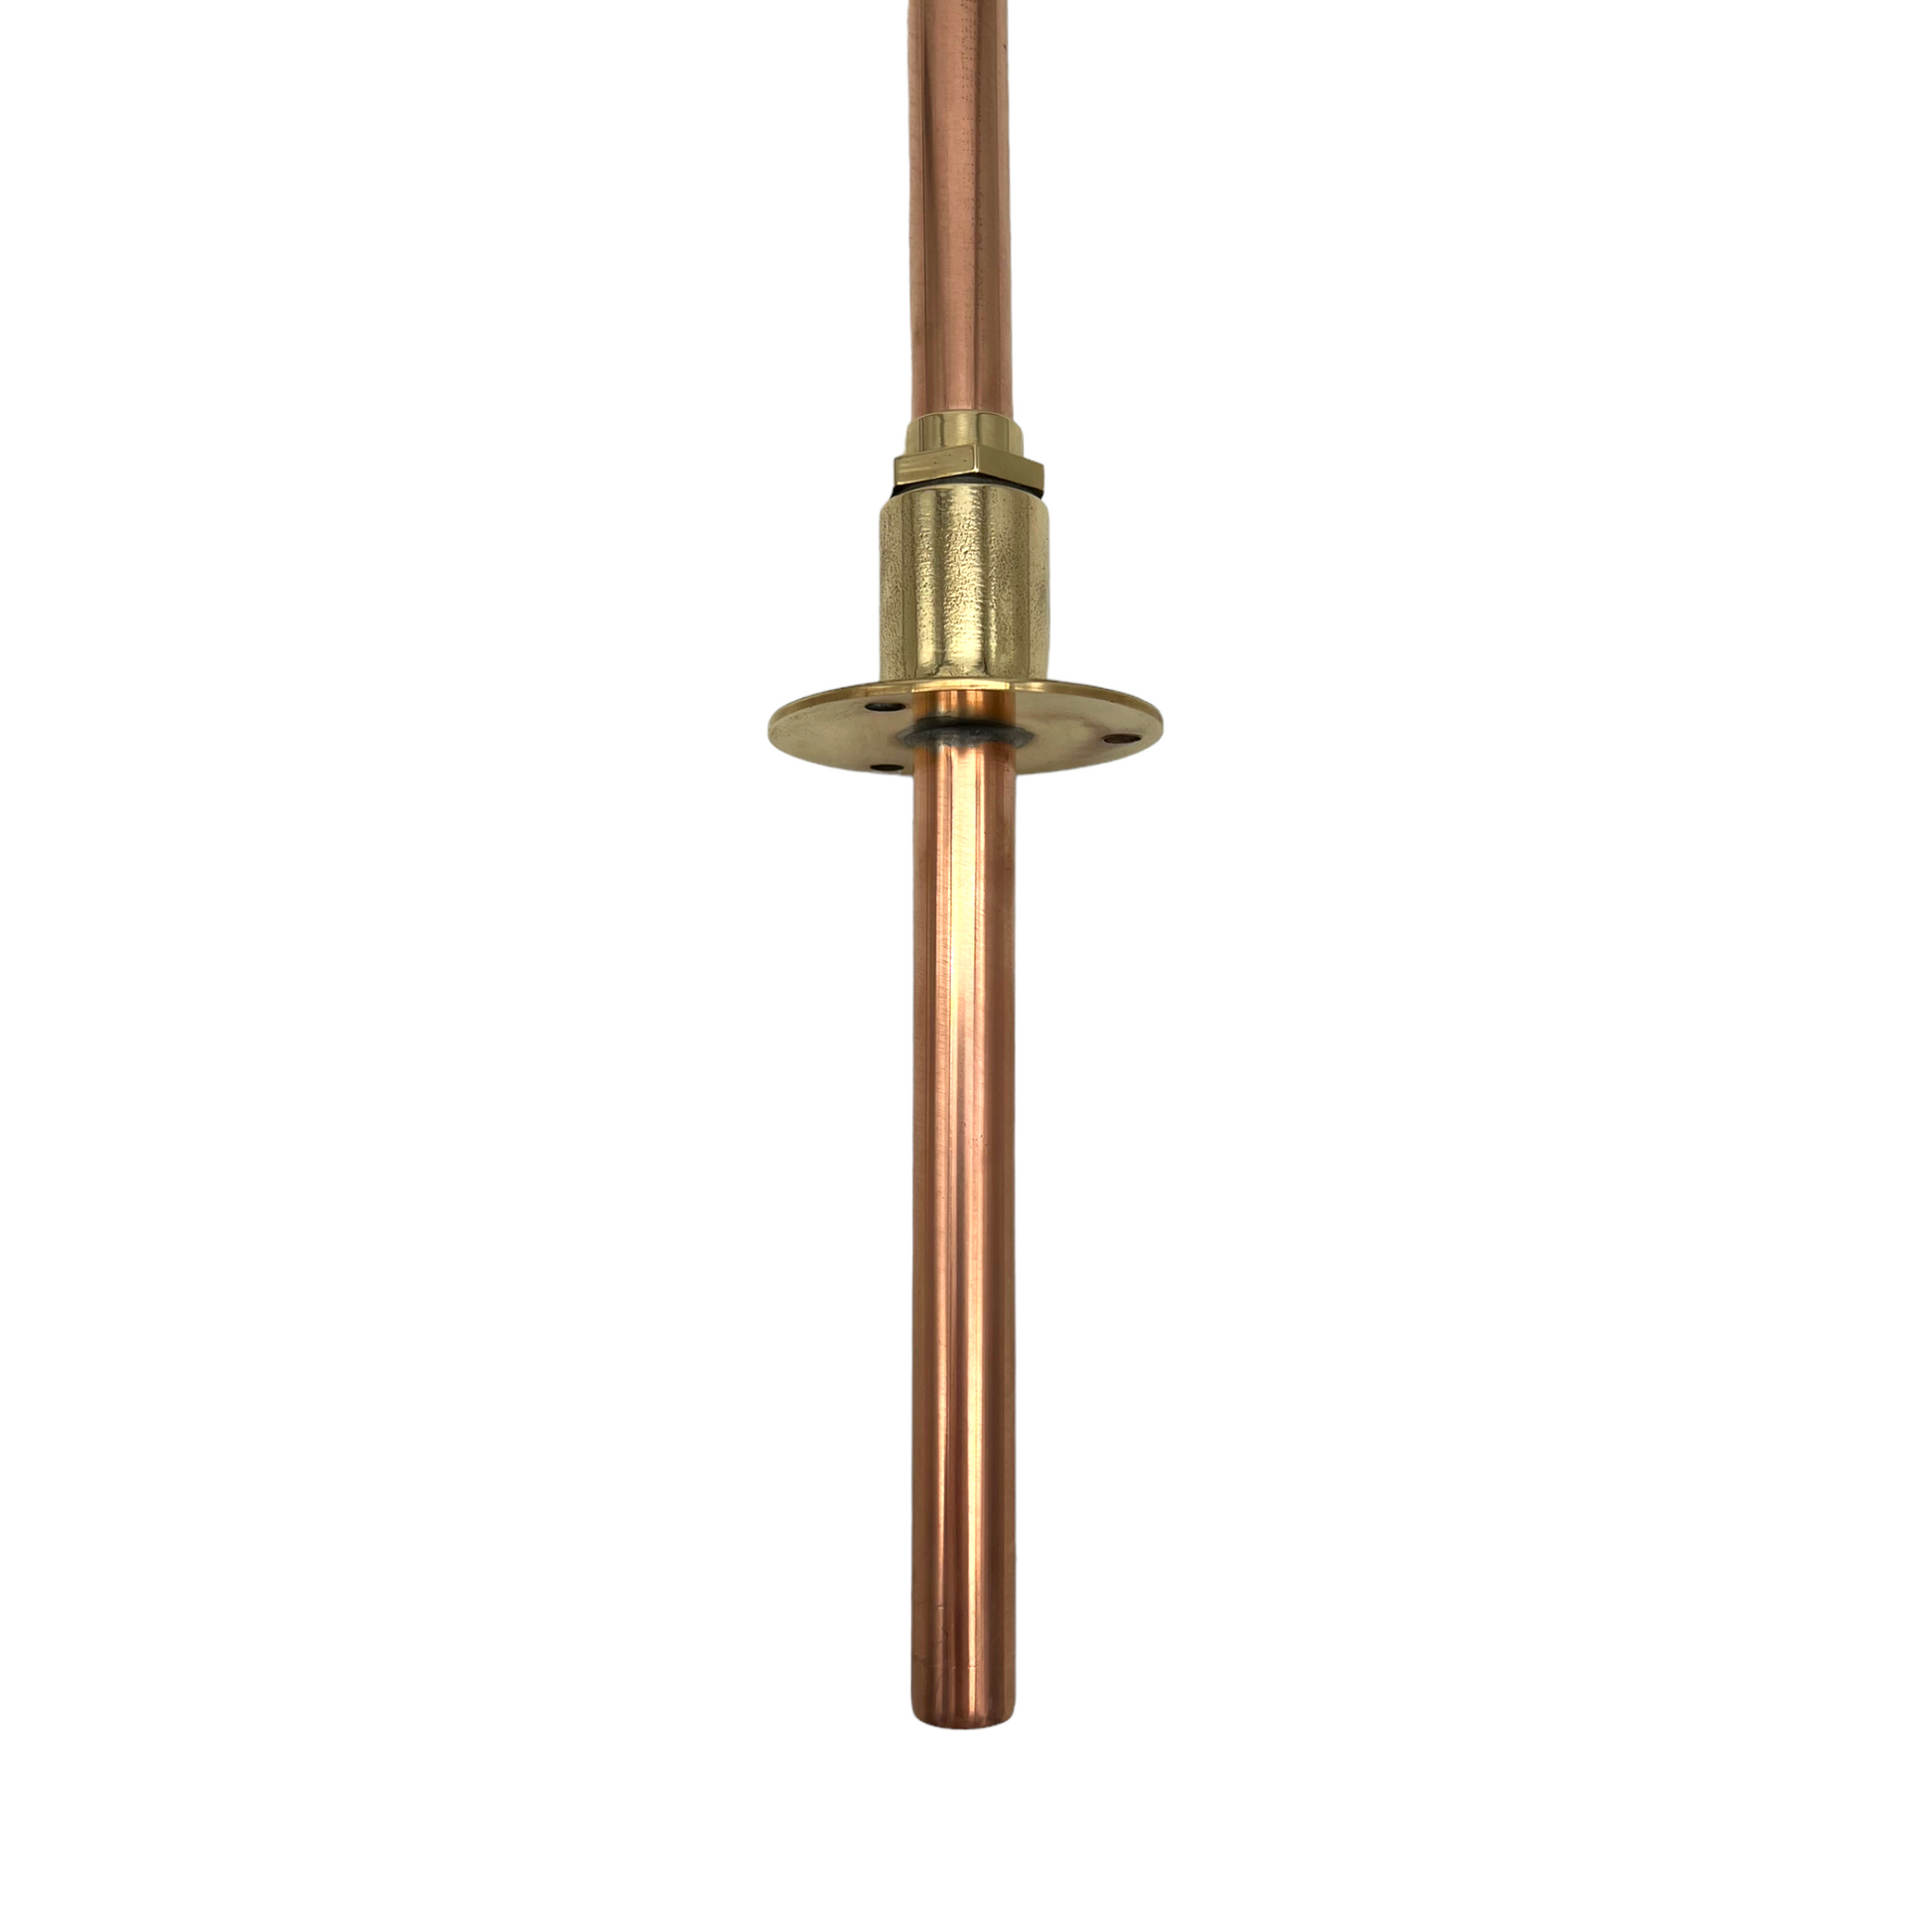 handmade copper and brass BIB style vintage tap with 15mm tail ends sold by All Things French Store